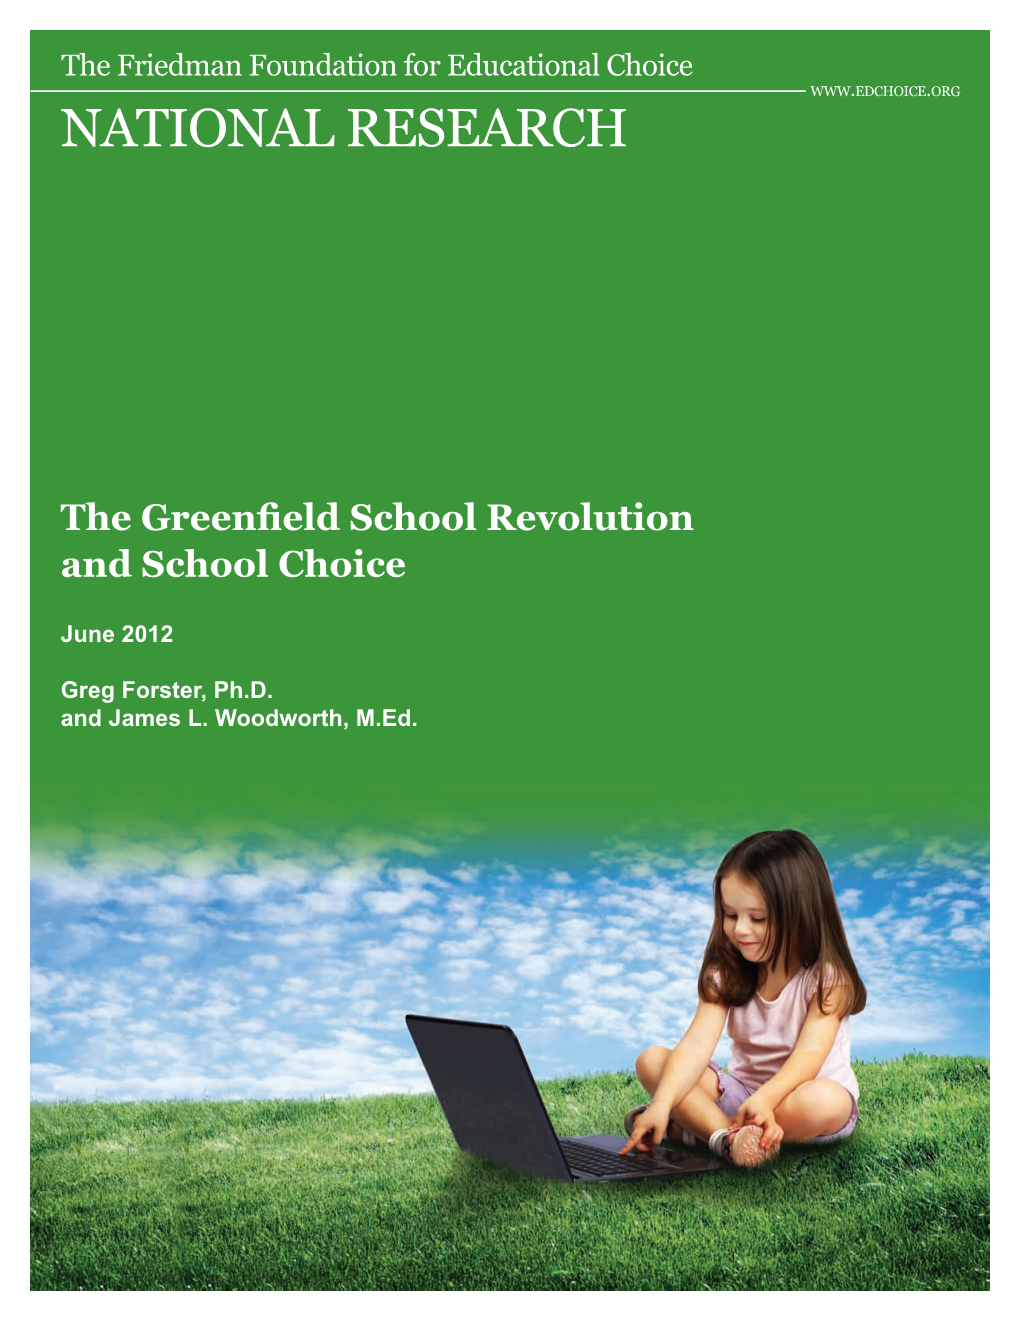 The Greenfield School Revolution and School Choice